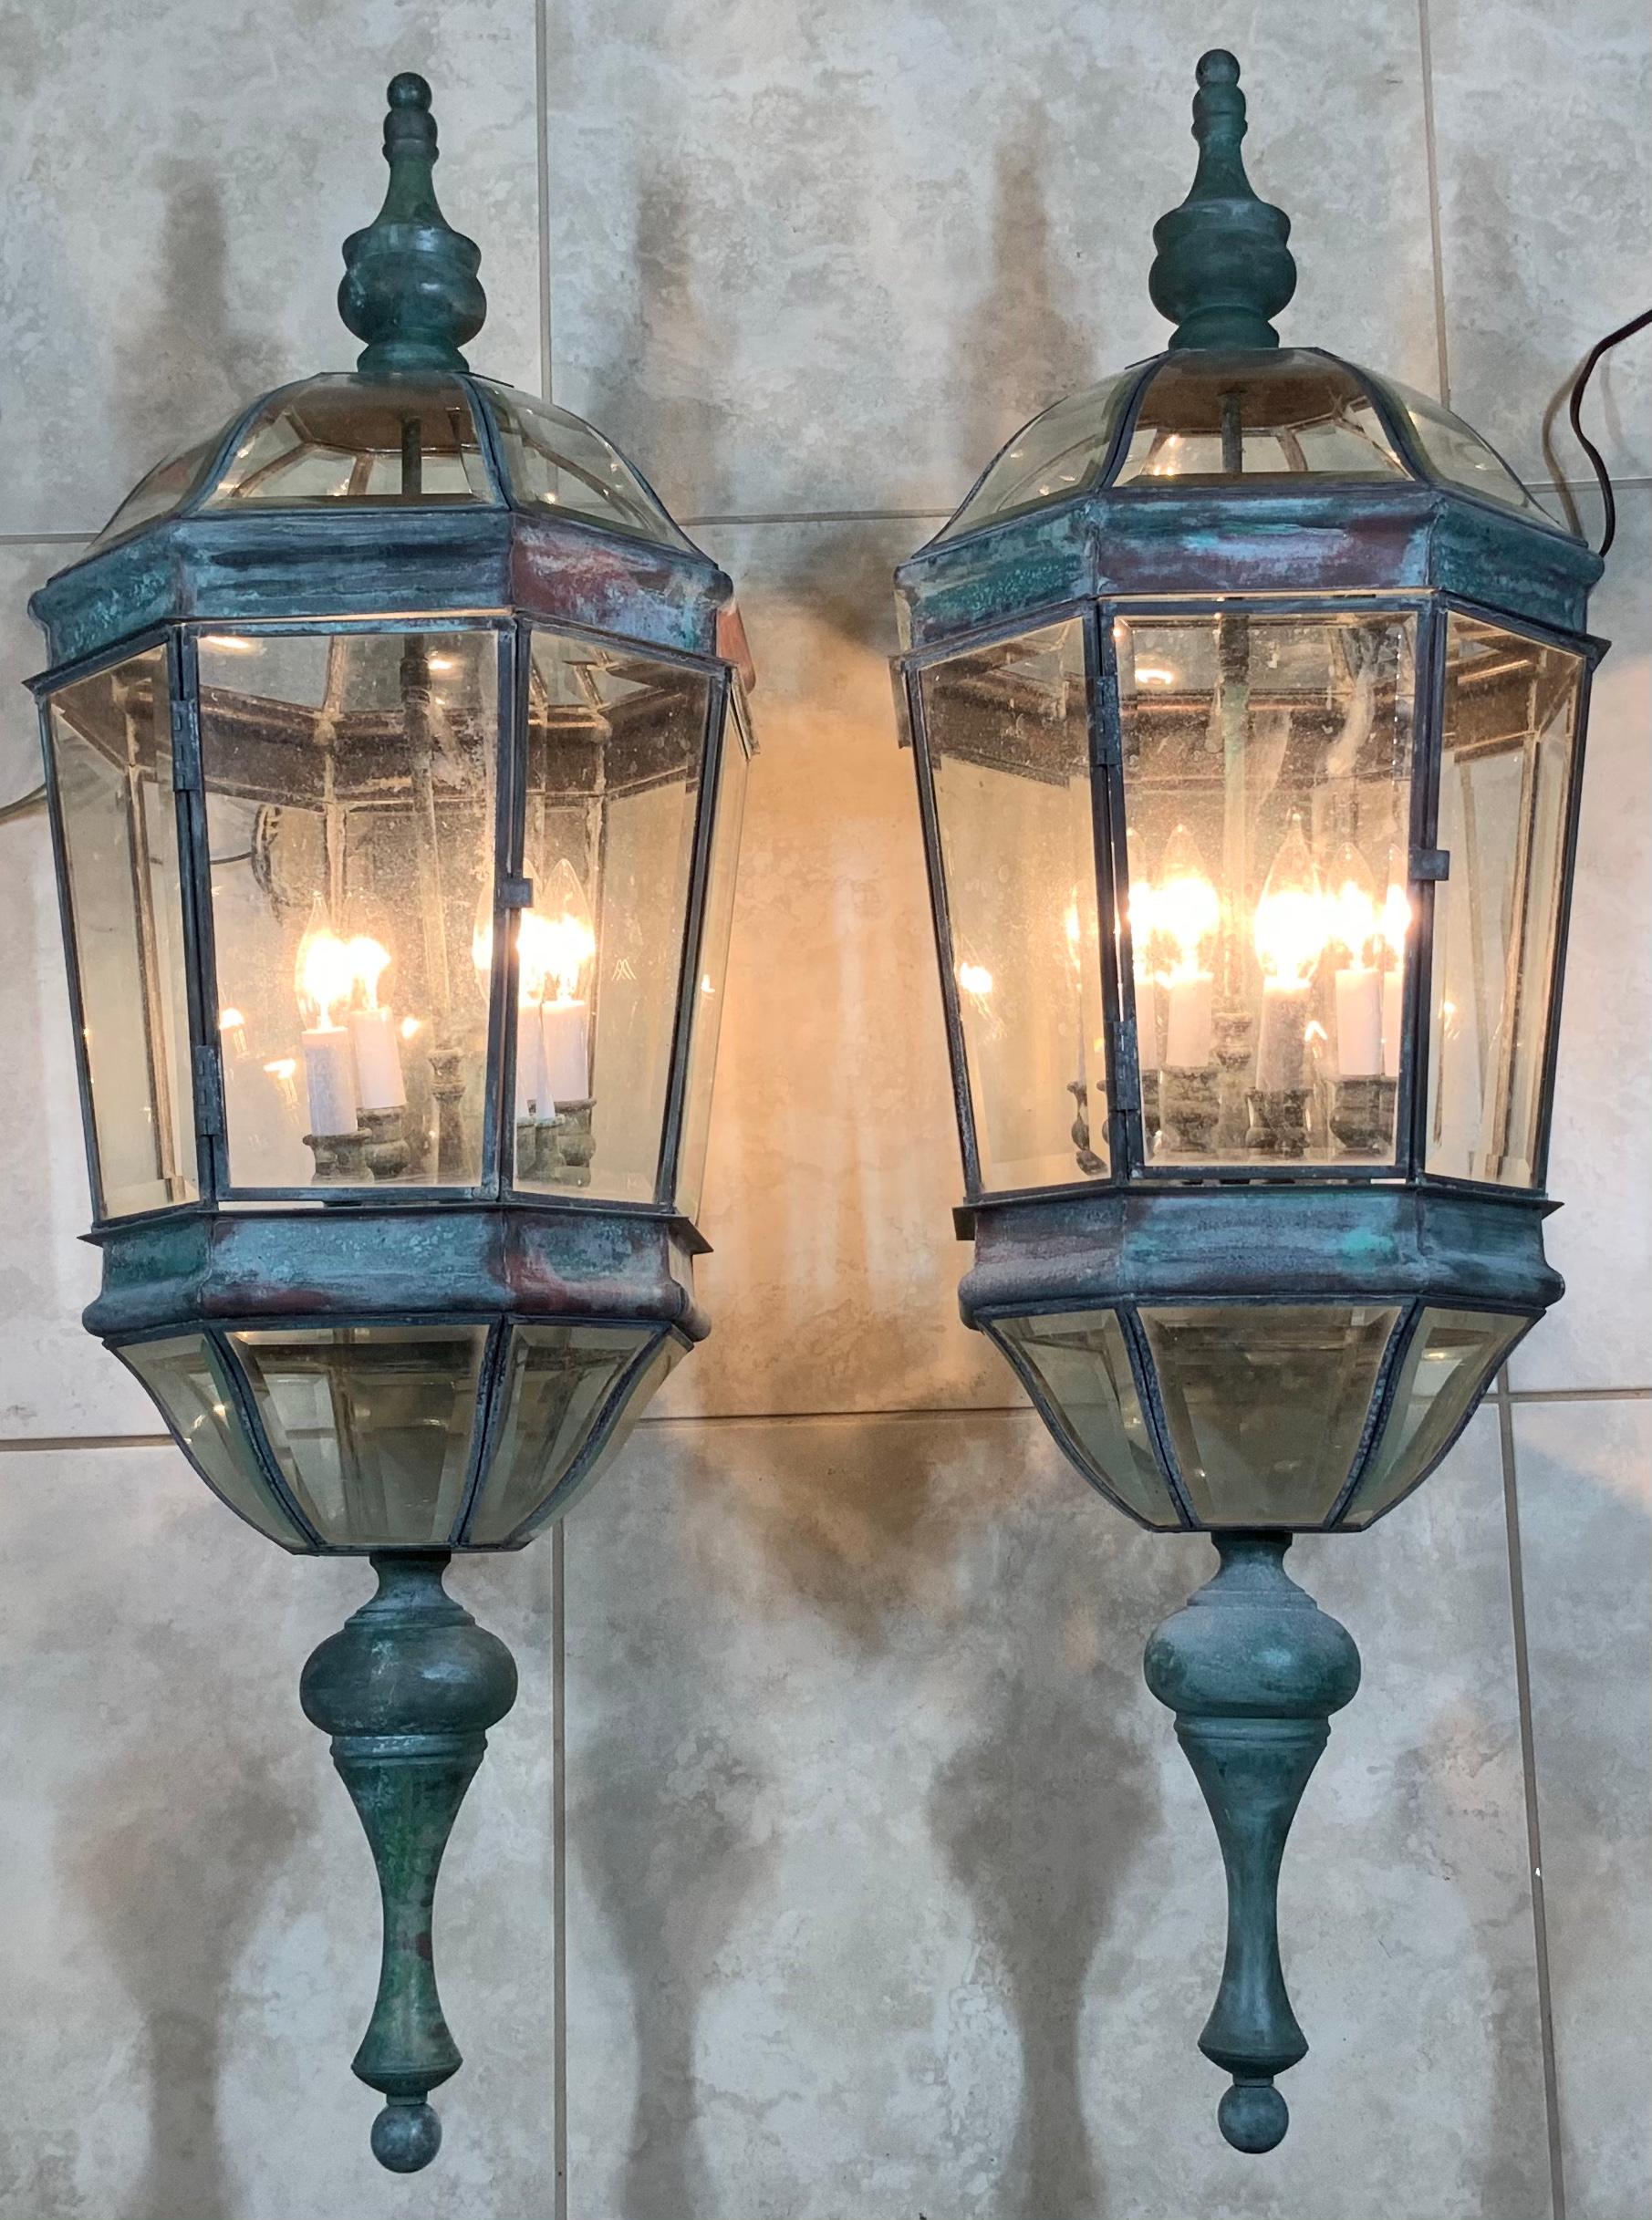 Exceptional large pair of wall lantern made of solid brass, quality workmanship, electrified with four 40/watt light each, beautiful beveled glass. Great light exposure.
Suitable for wet location.
Great patina decorative pair of lantern for indoor